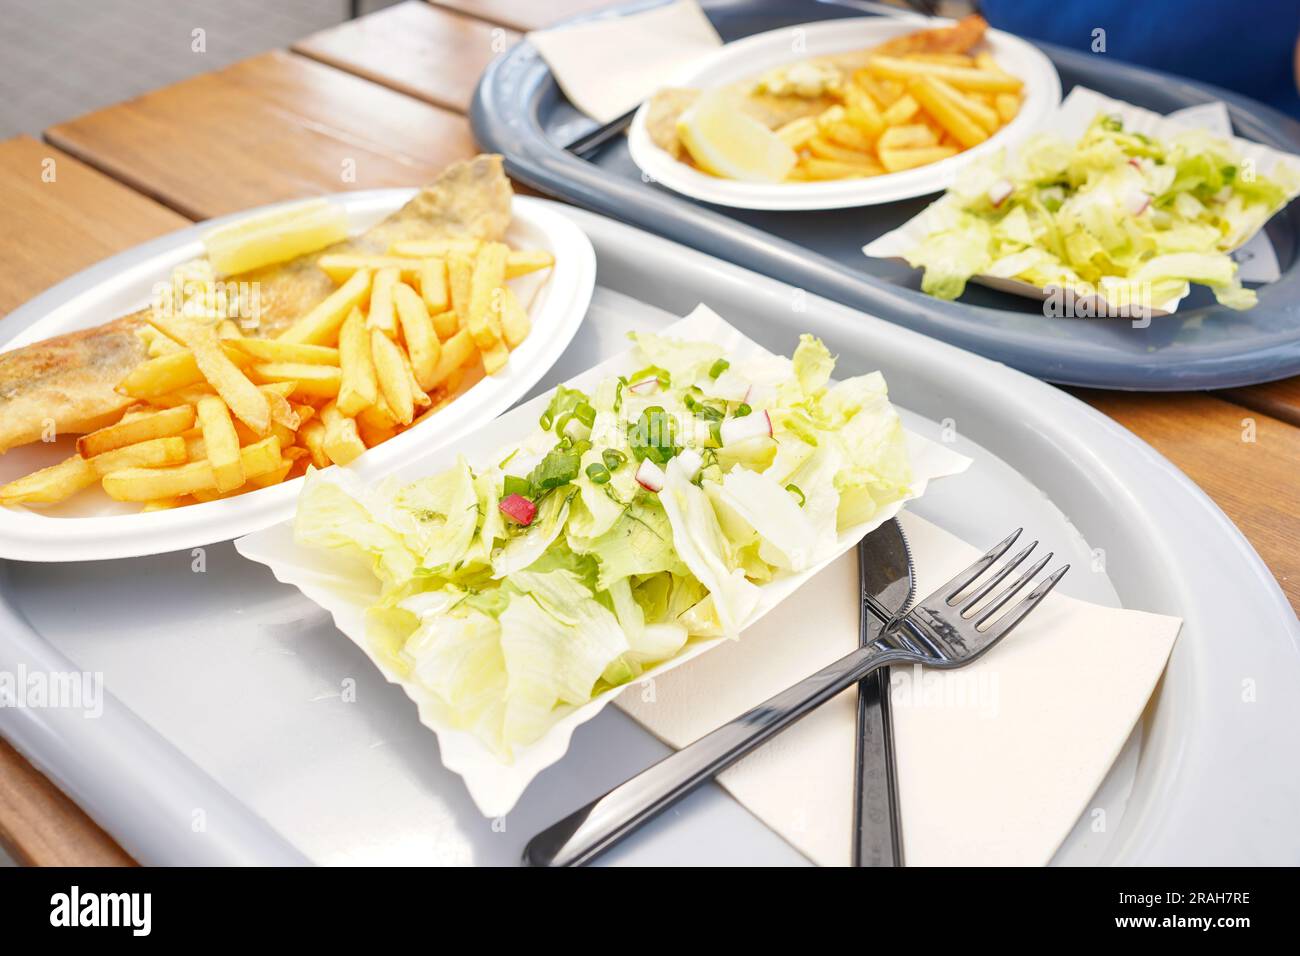 Fish and chips on a plate. Fried fish with butter on it and french fries on plastic plate in restaurant Stock Photo